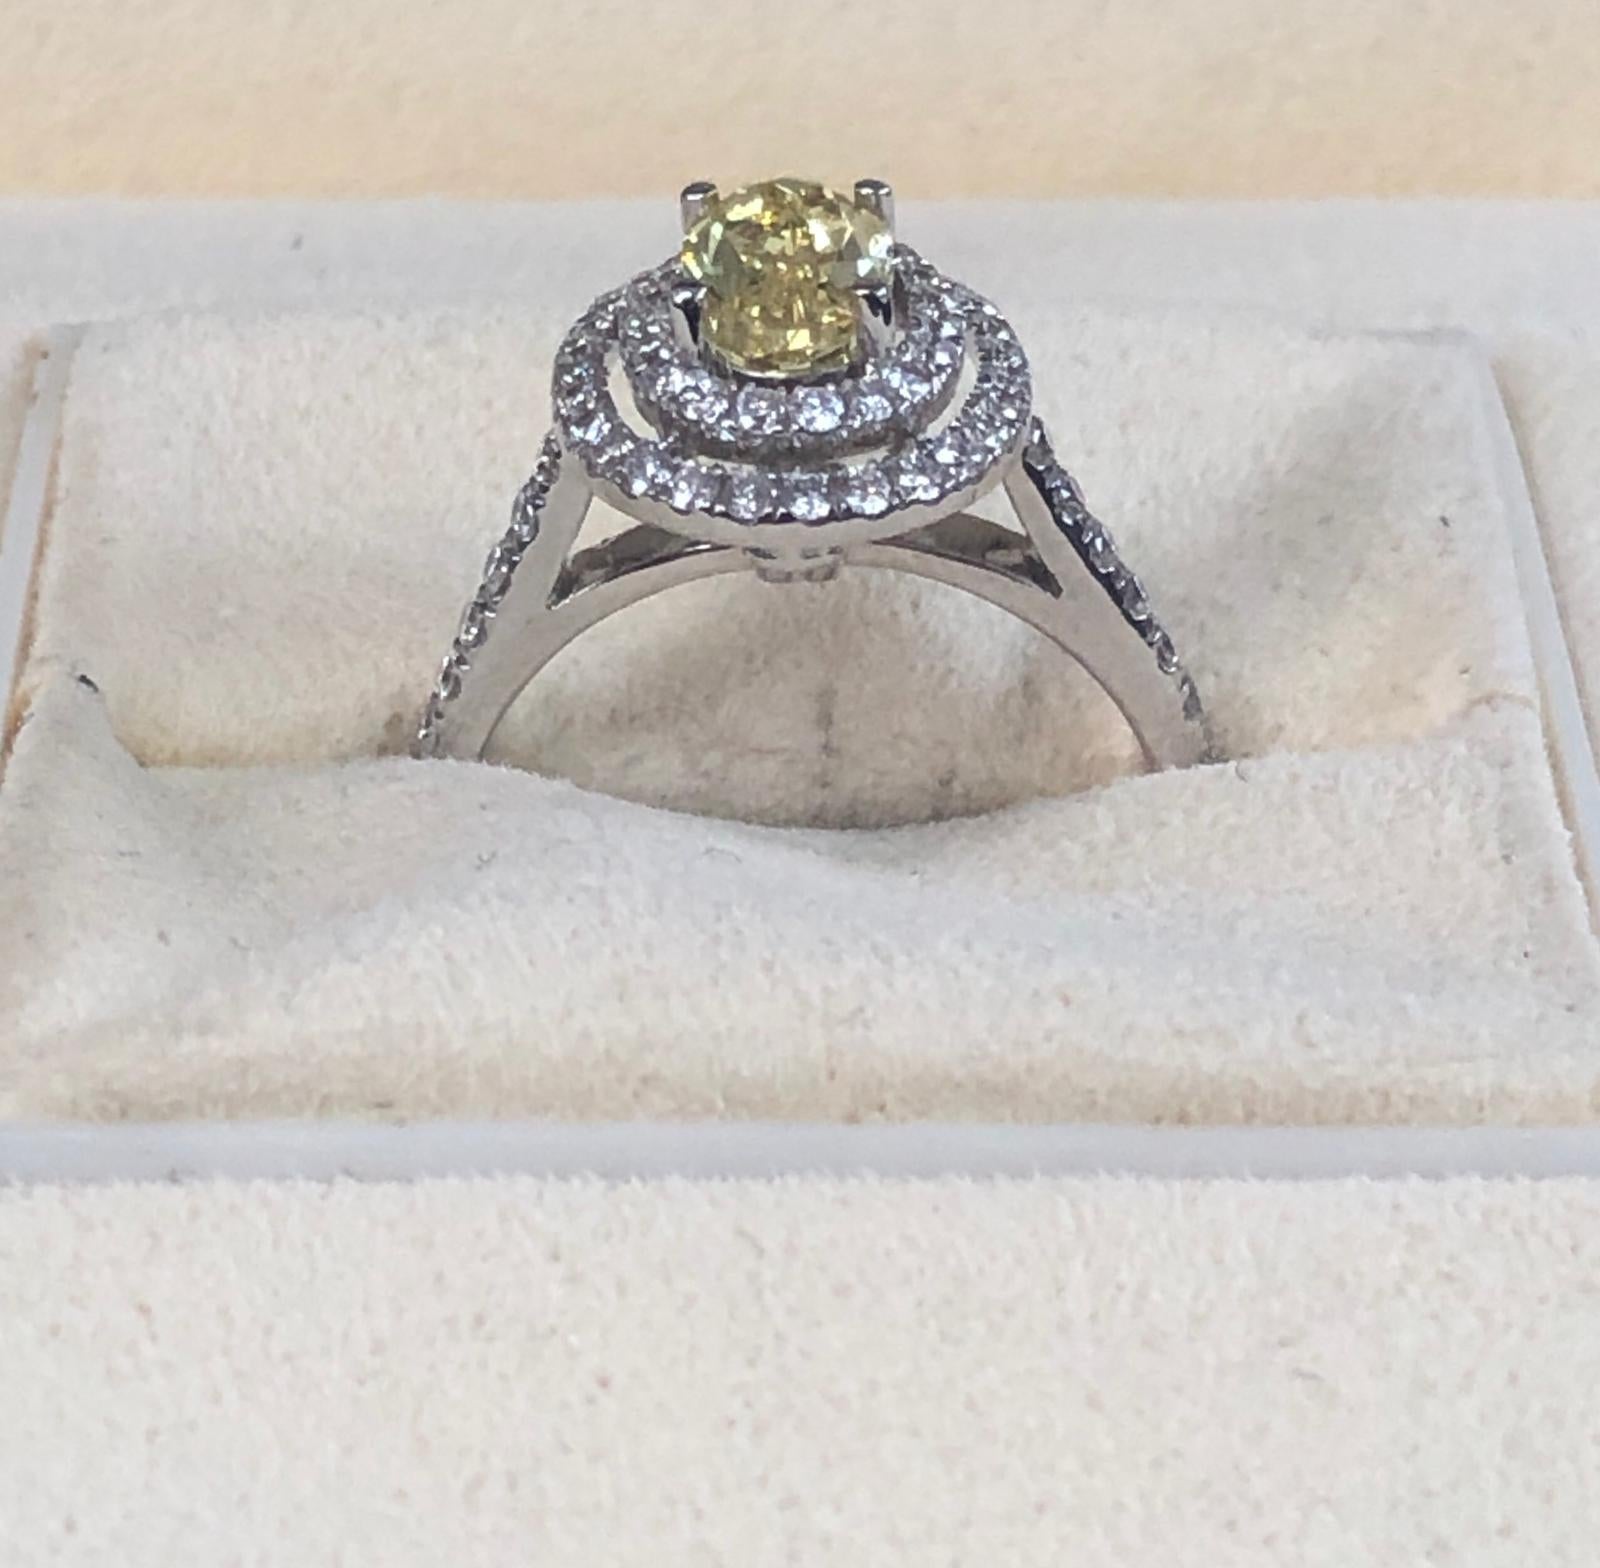 Natural Fancy Vivid Yellow oval diamond weighing 1.00 carats by GIA.  Half way paved white diamonds in the double halo setting. Its transparency and luster are excellent. set on 18K white gold, this ring is the ultimate gift for anniversaries,